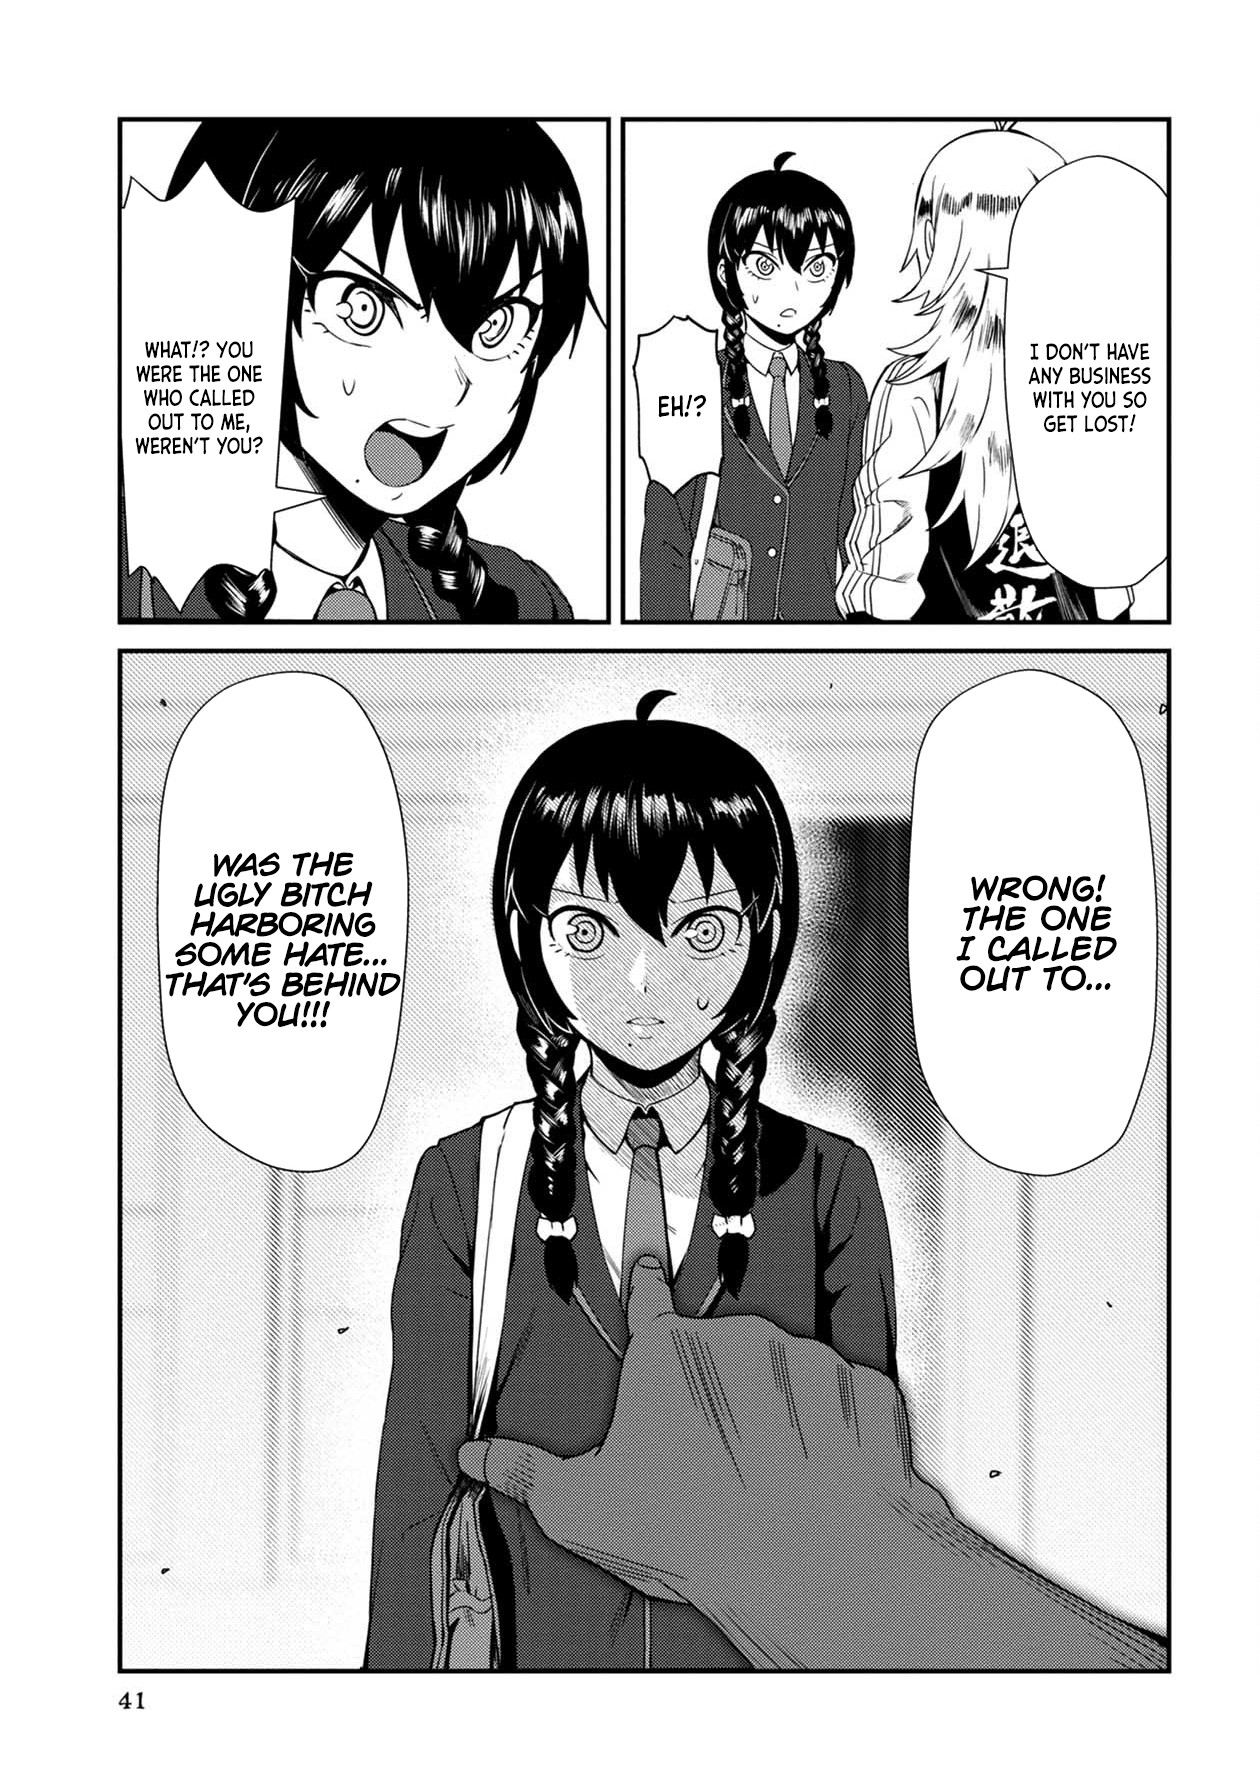 Bad Girl-Exorcist Reina Chapter 3: Exorcism #3: Ugly - Picture 3